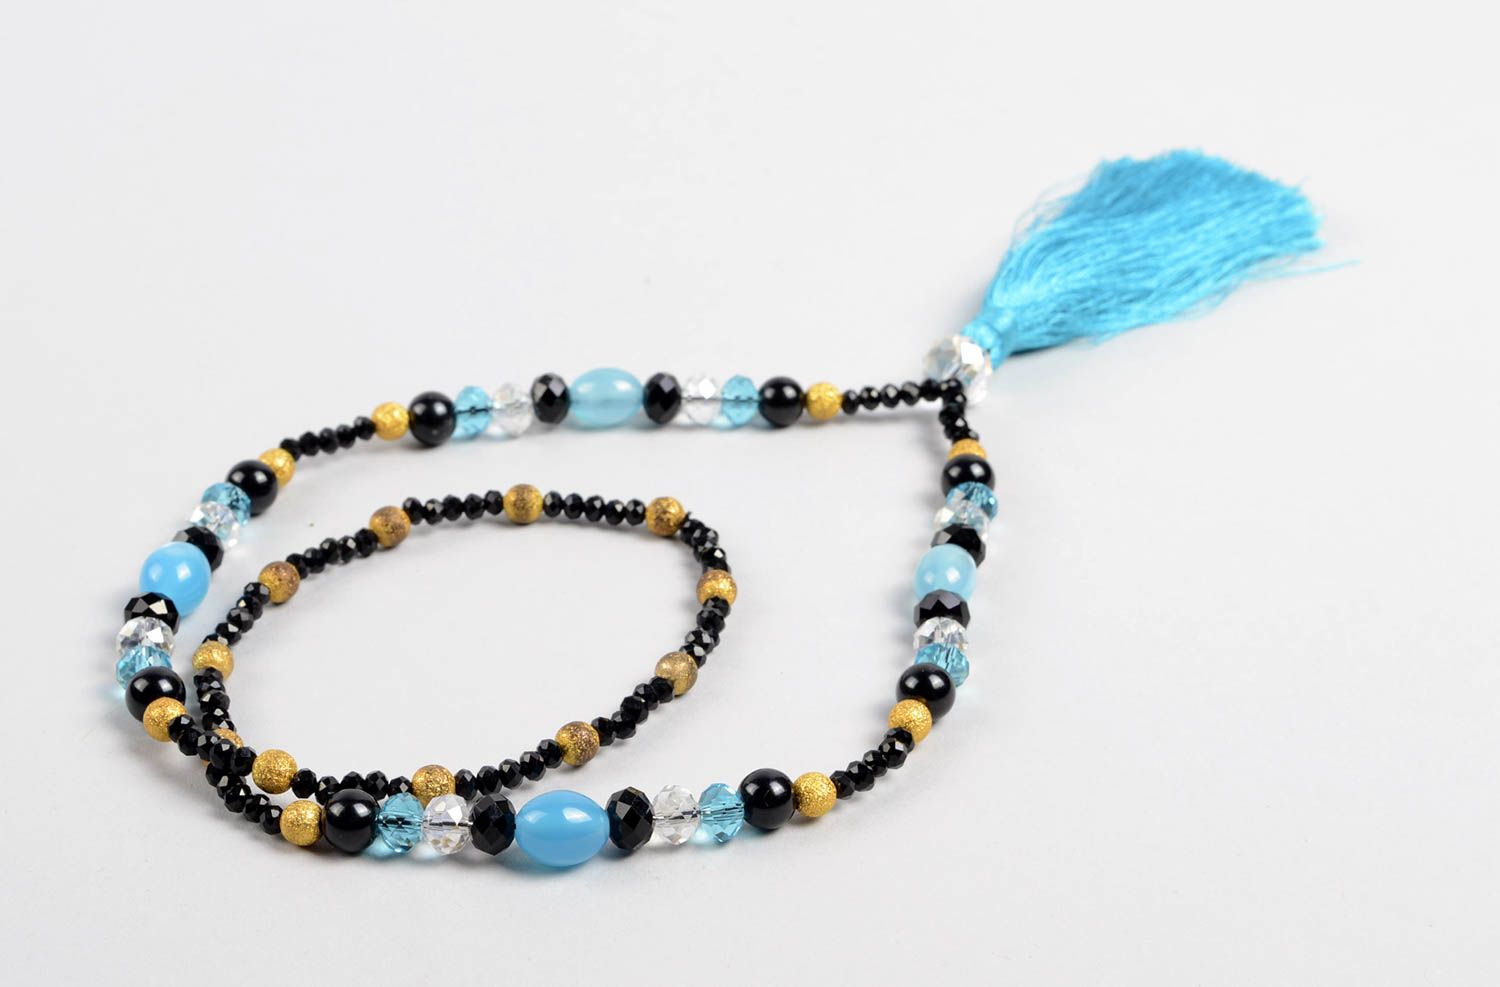 Handmade jewelry beaded necklace long necklaces designer accessories cool gifts photo 4